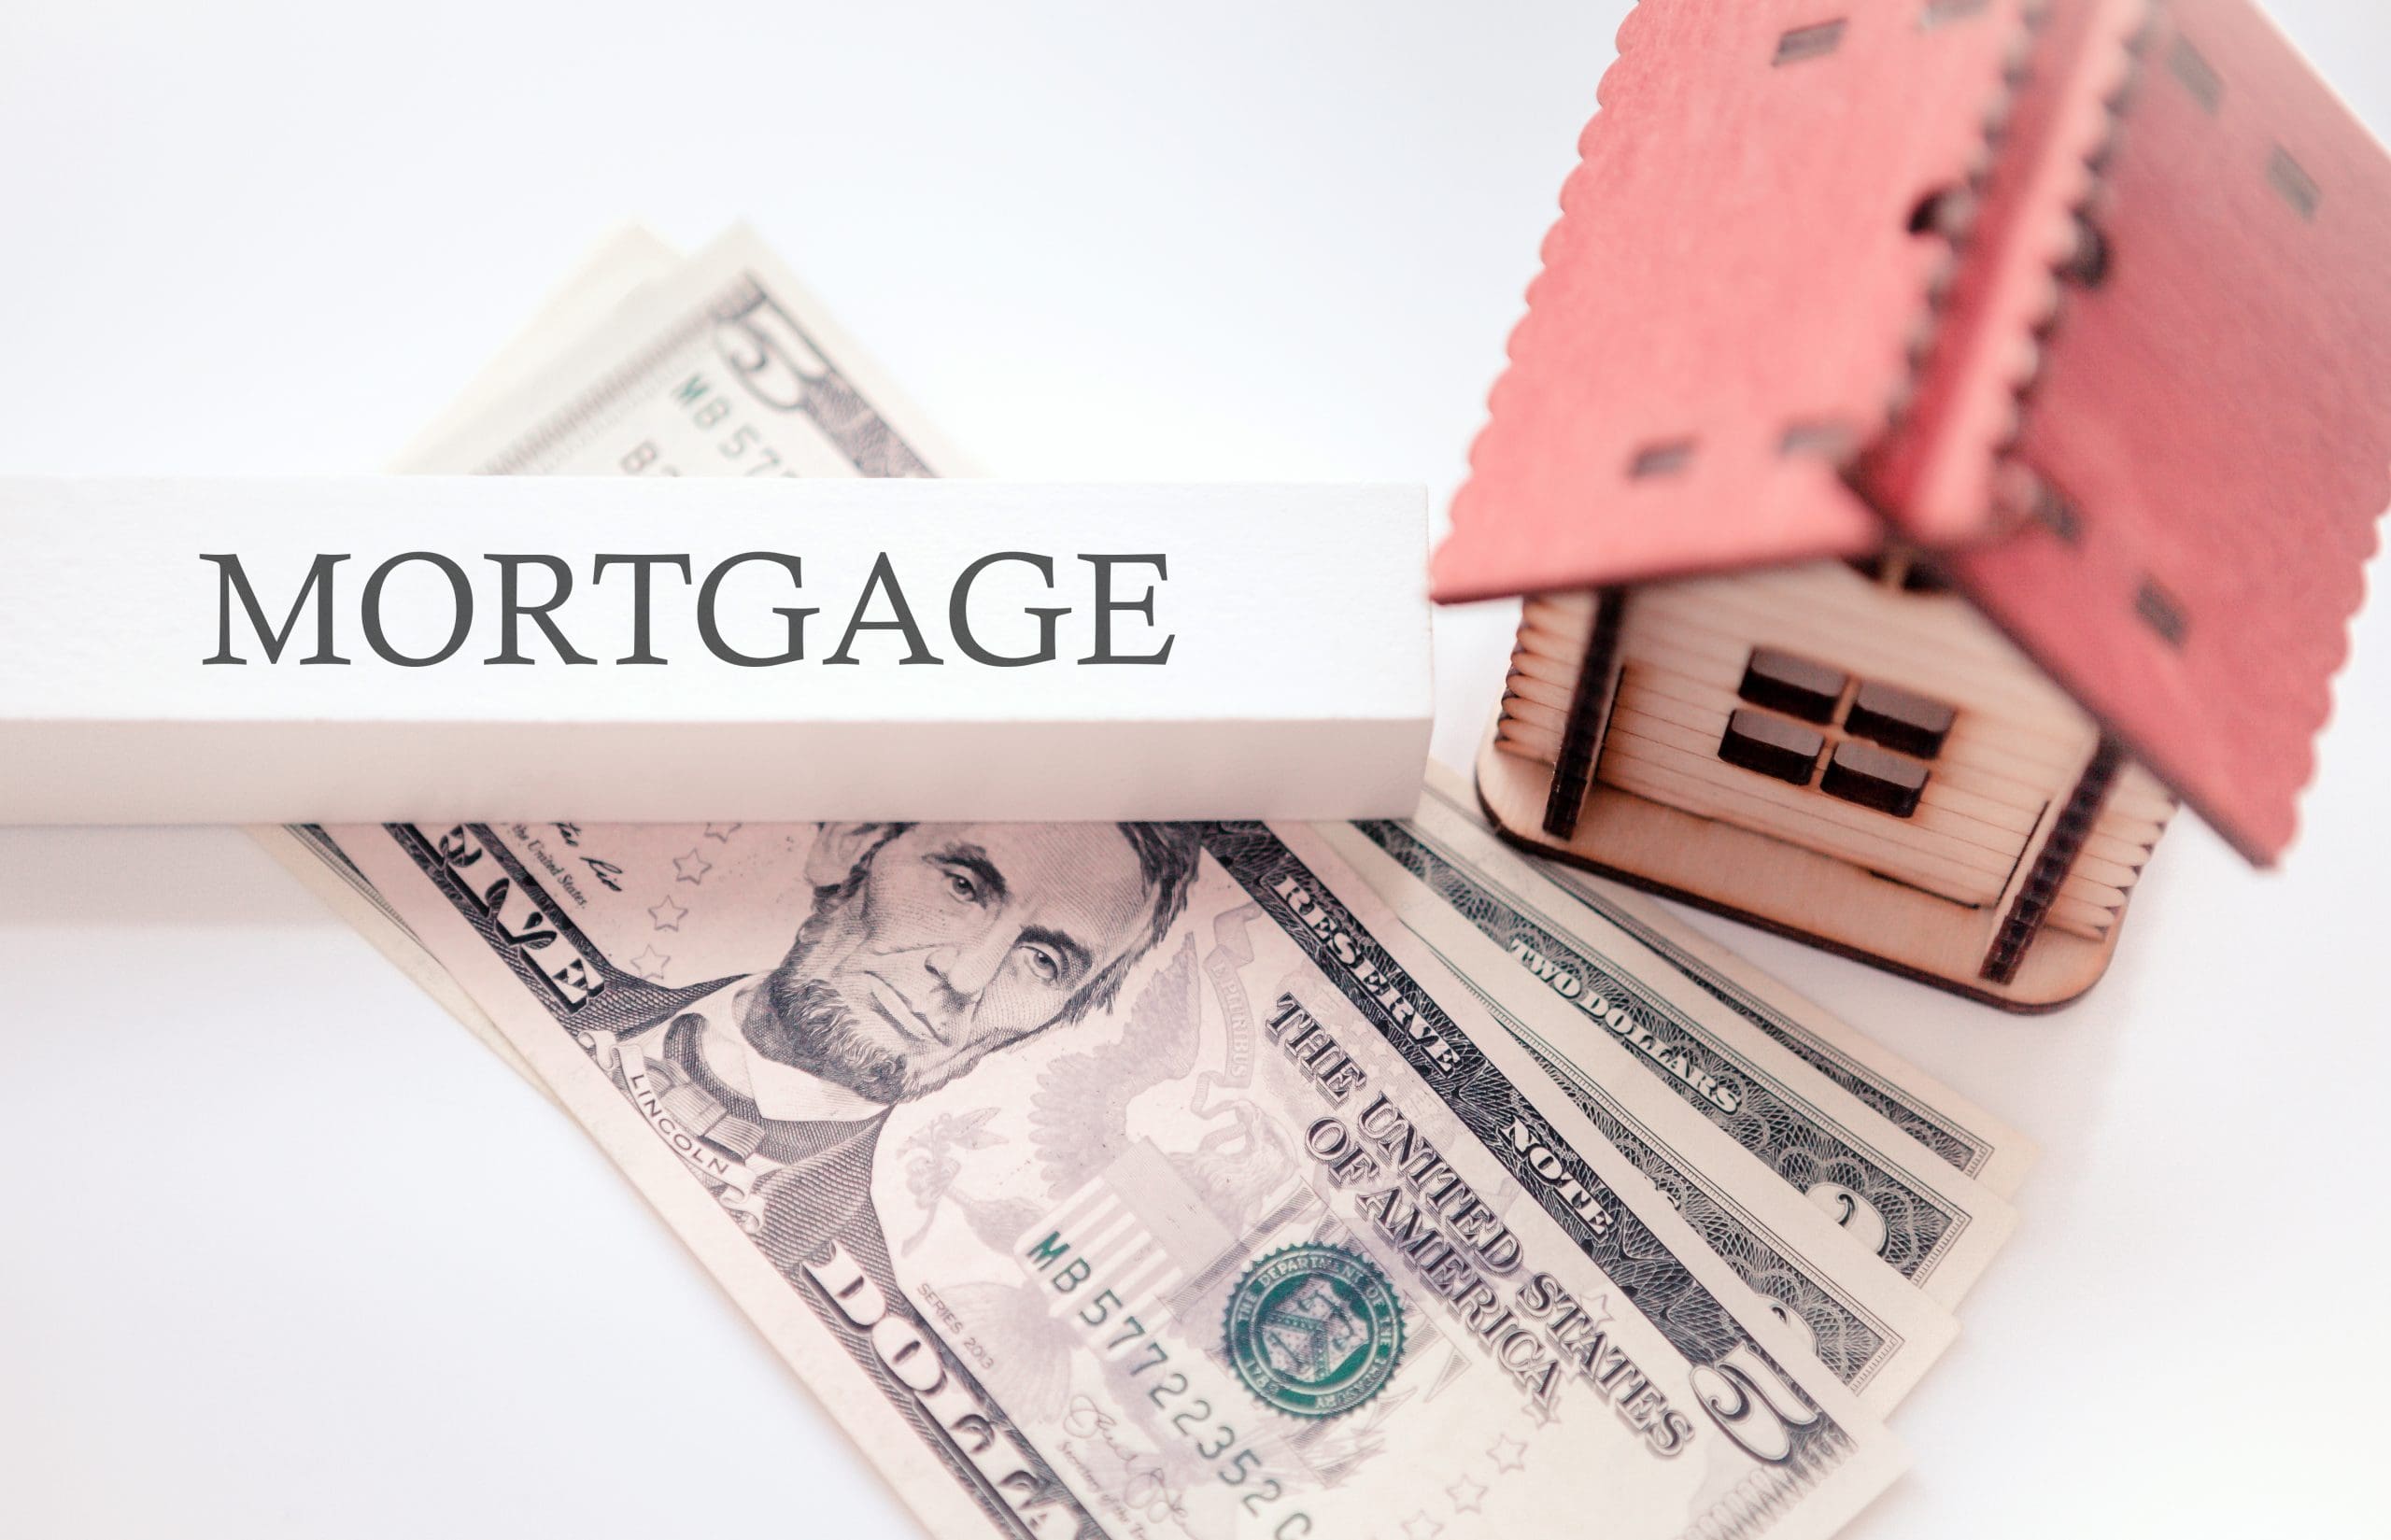 How to Find the Best Mortgage Lender